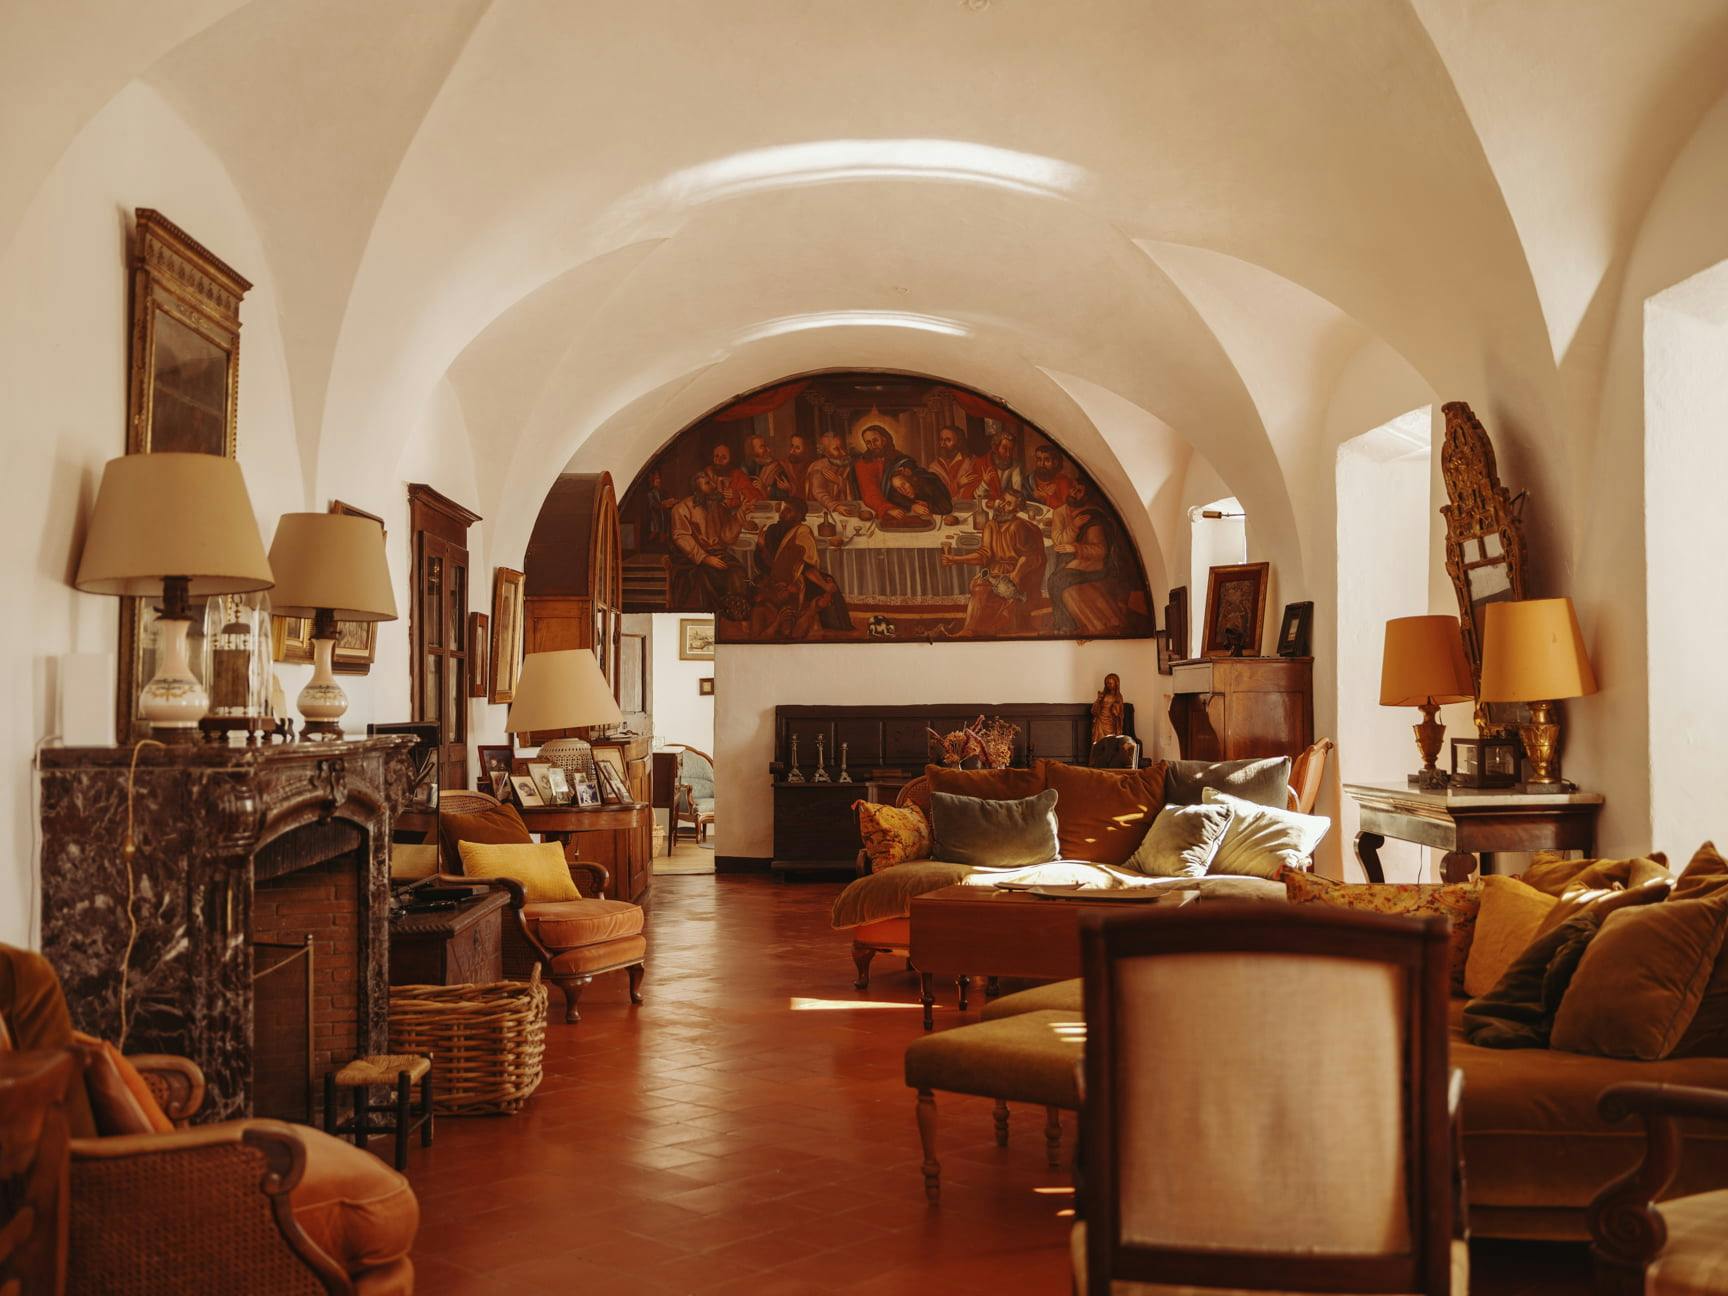 Living room with period fresco depicting the scene